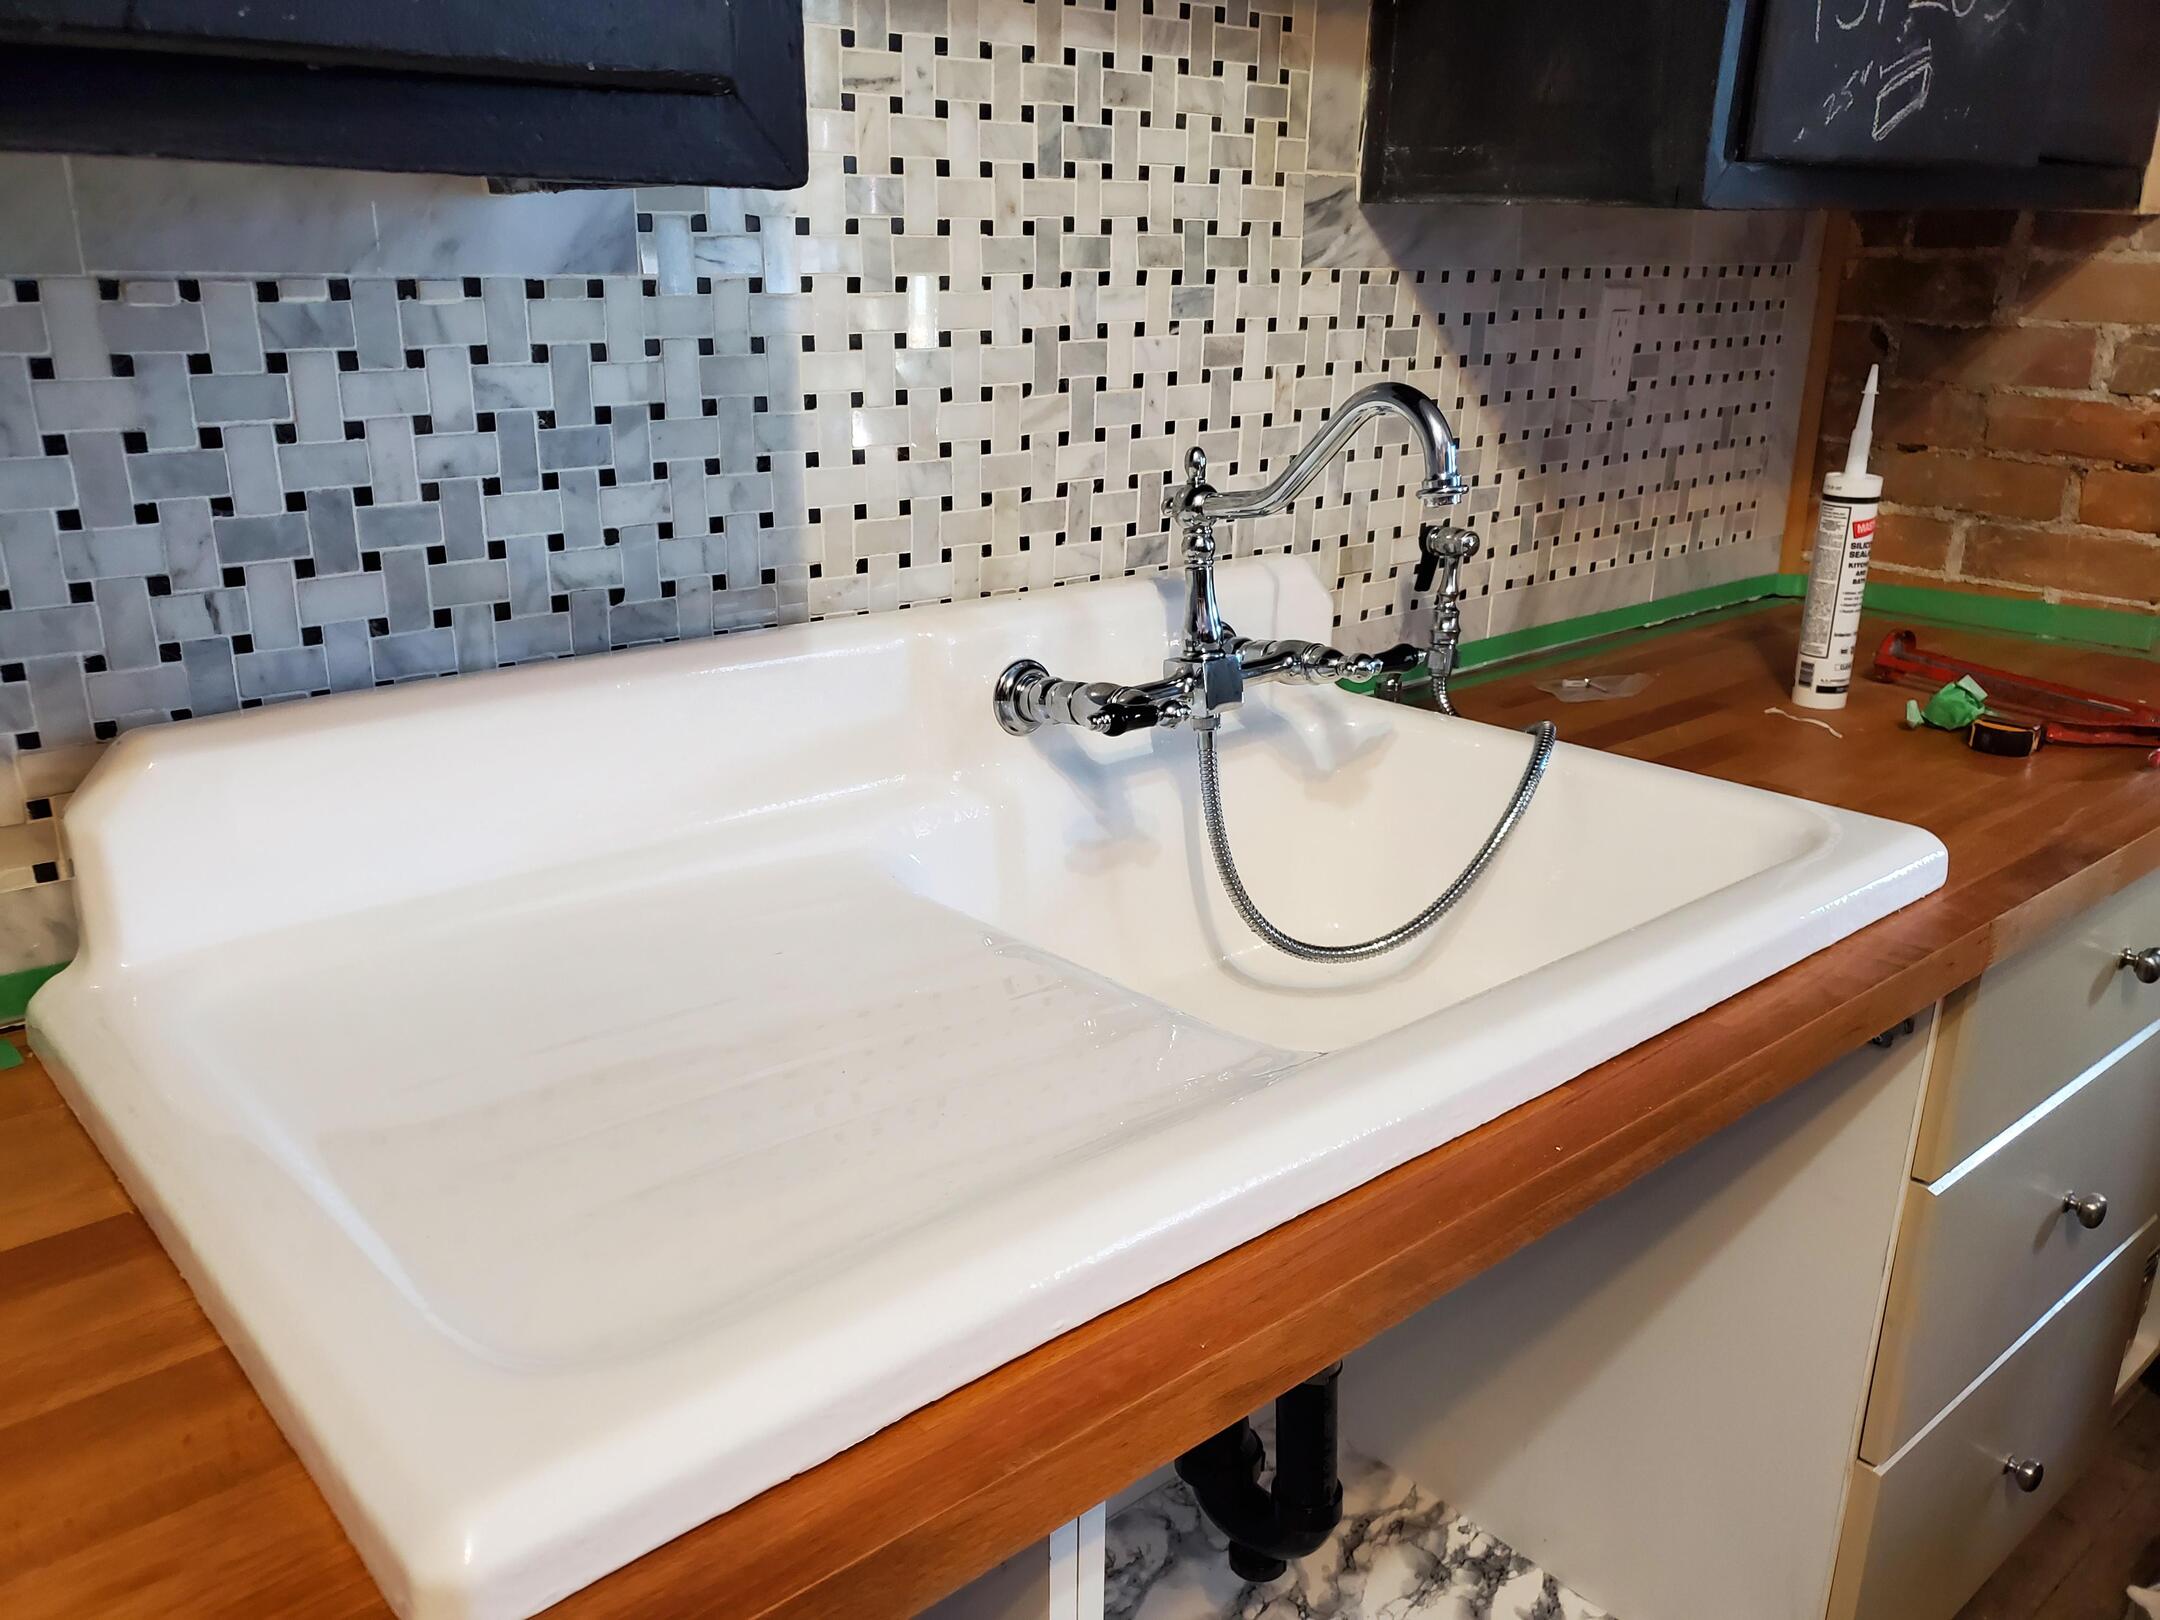 3 Ways to Clean a Cast Iron Sink - wikiHow Life